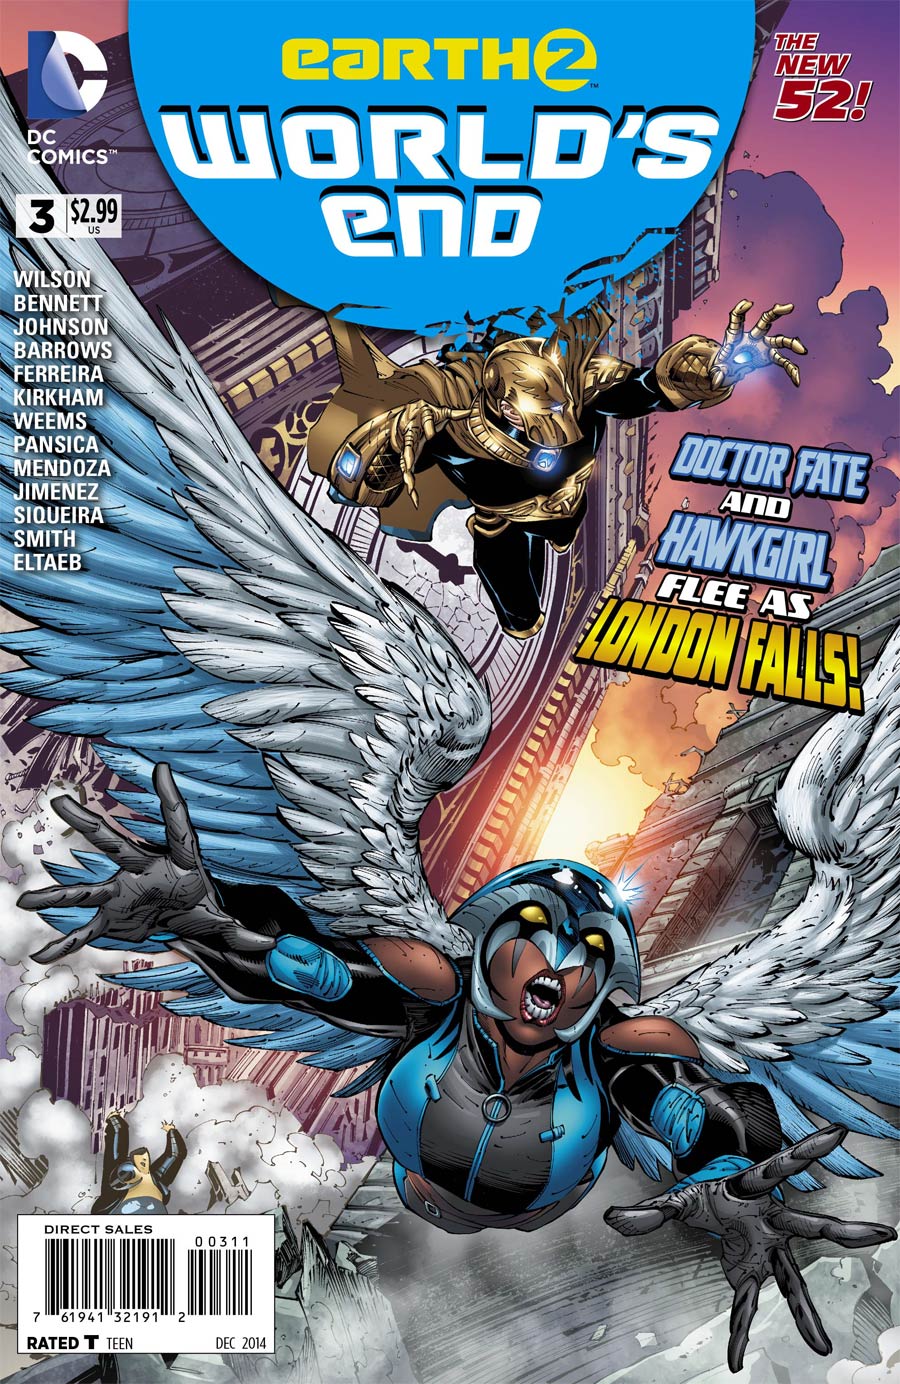 Earth 2 Worlds End #3